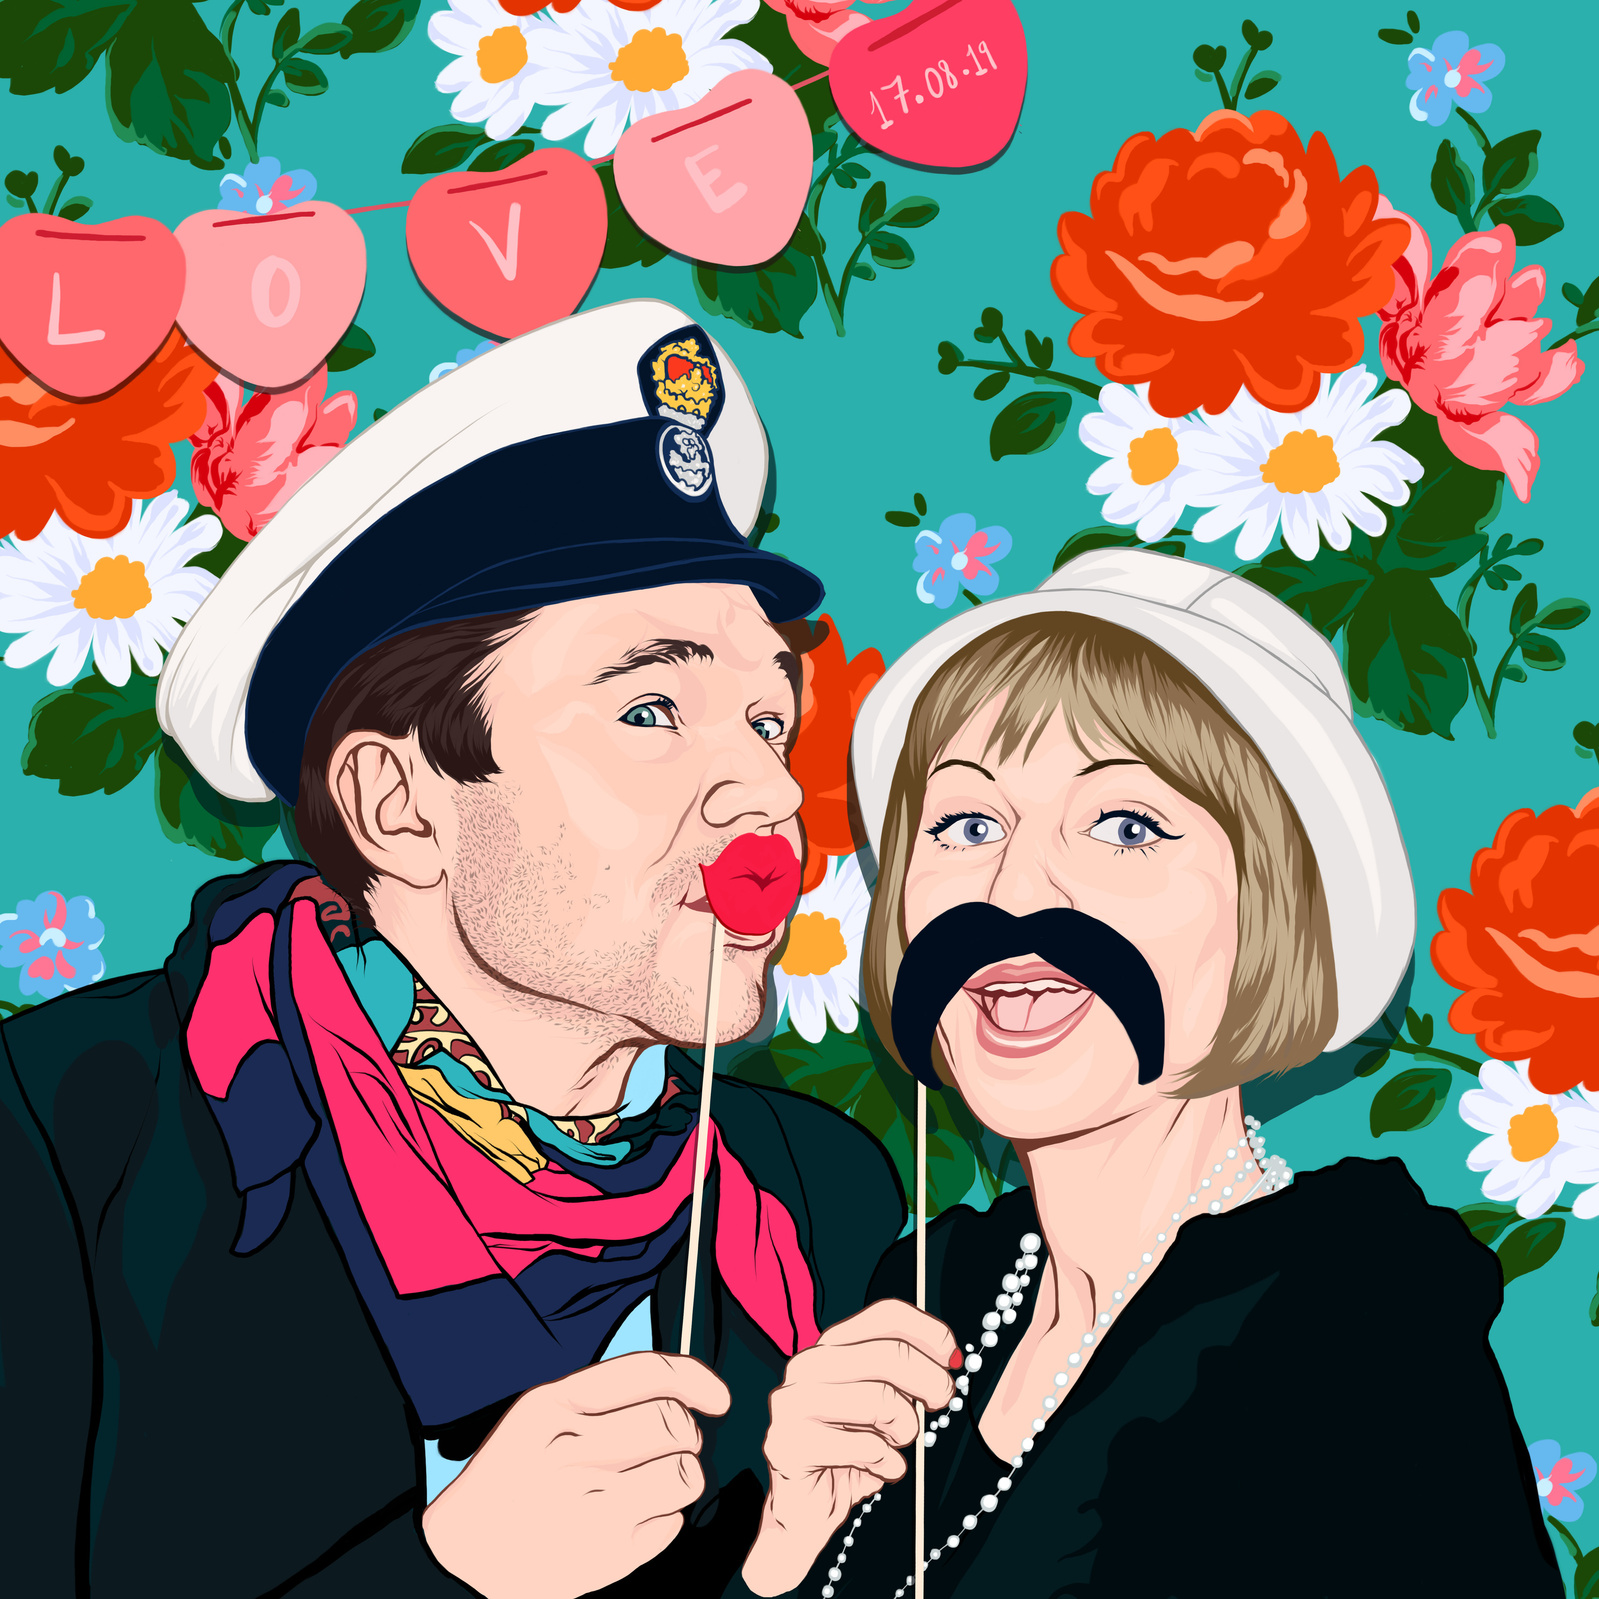 The illustration is based on a Photo Booth image at a party and features a male and female couple.  They are posing in sailor hats and are wearing fake moustaches and a cravat. There is a bright floral background, roses and daisies. 